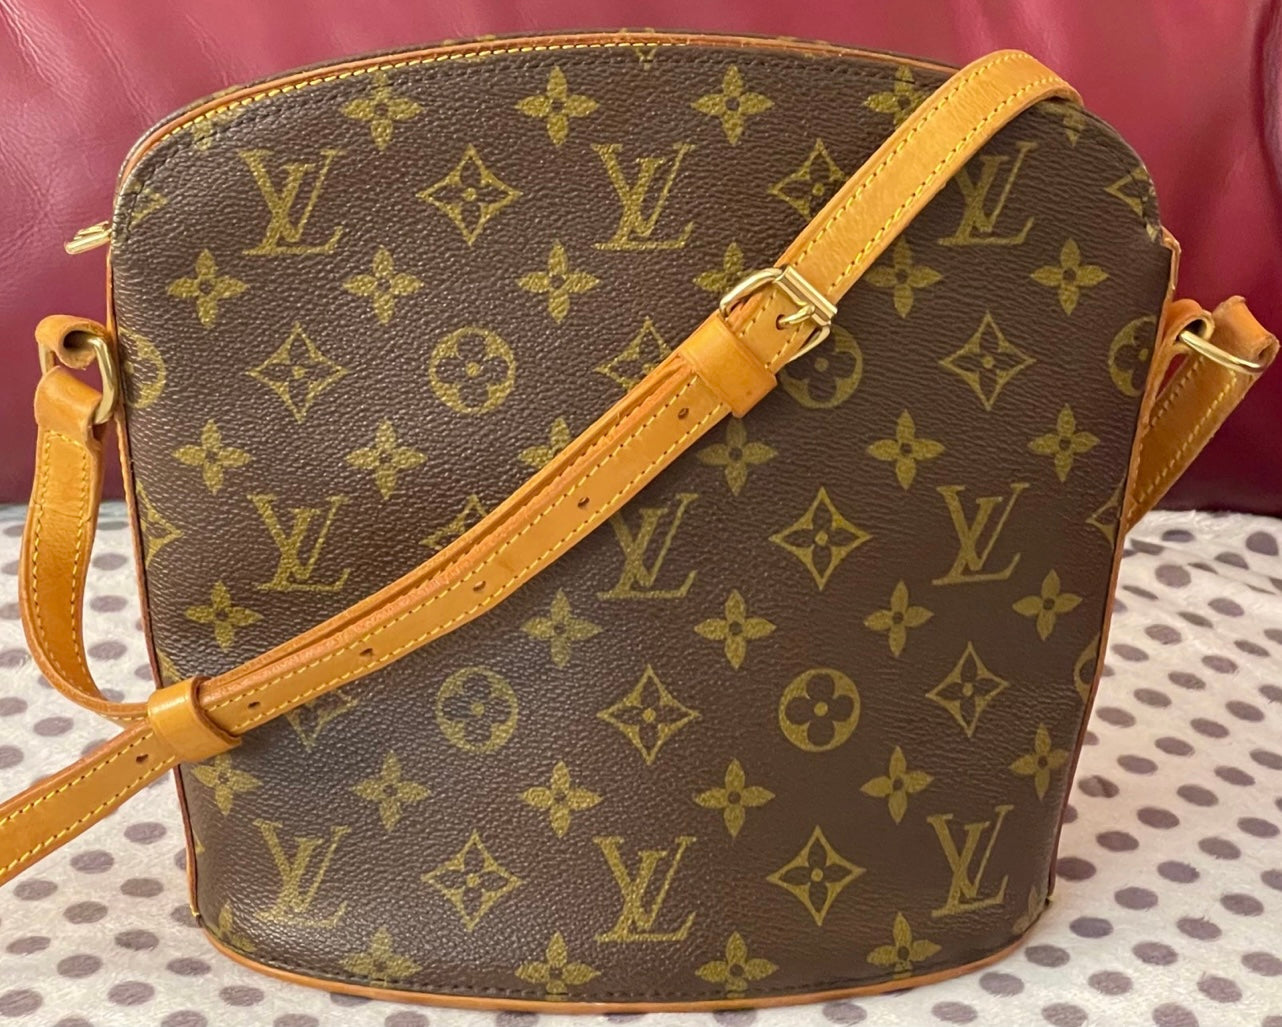 Louis Vuitton - Authenticated Drouot Handbag - Synthetic Brown for Women, Very Good Condition